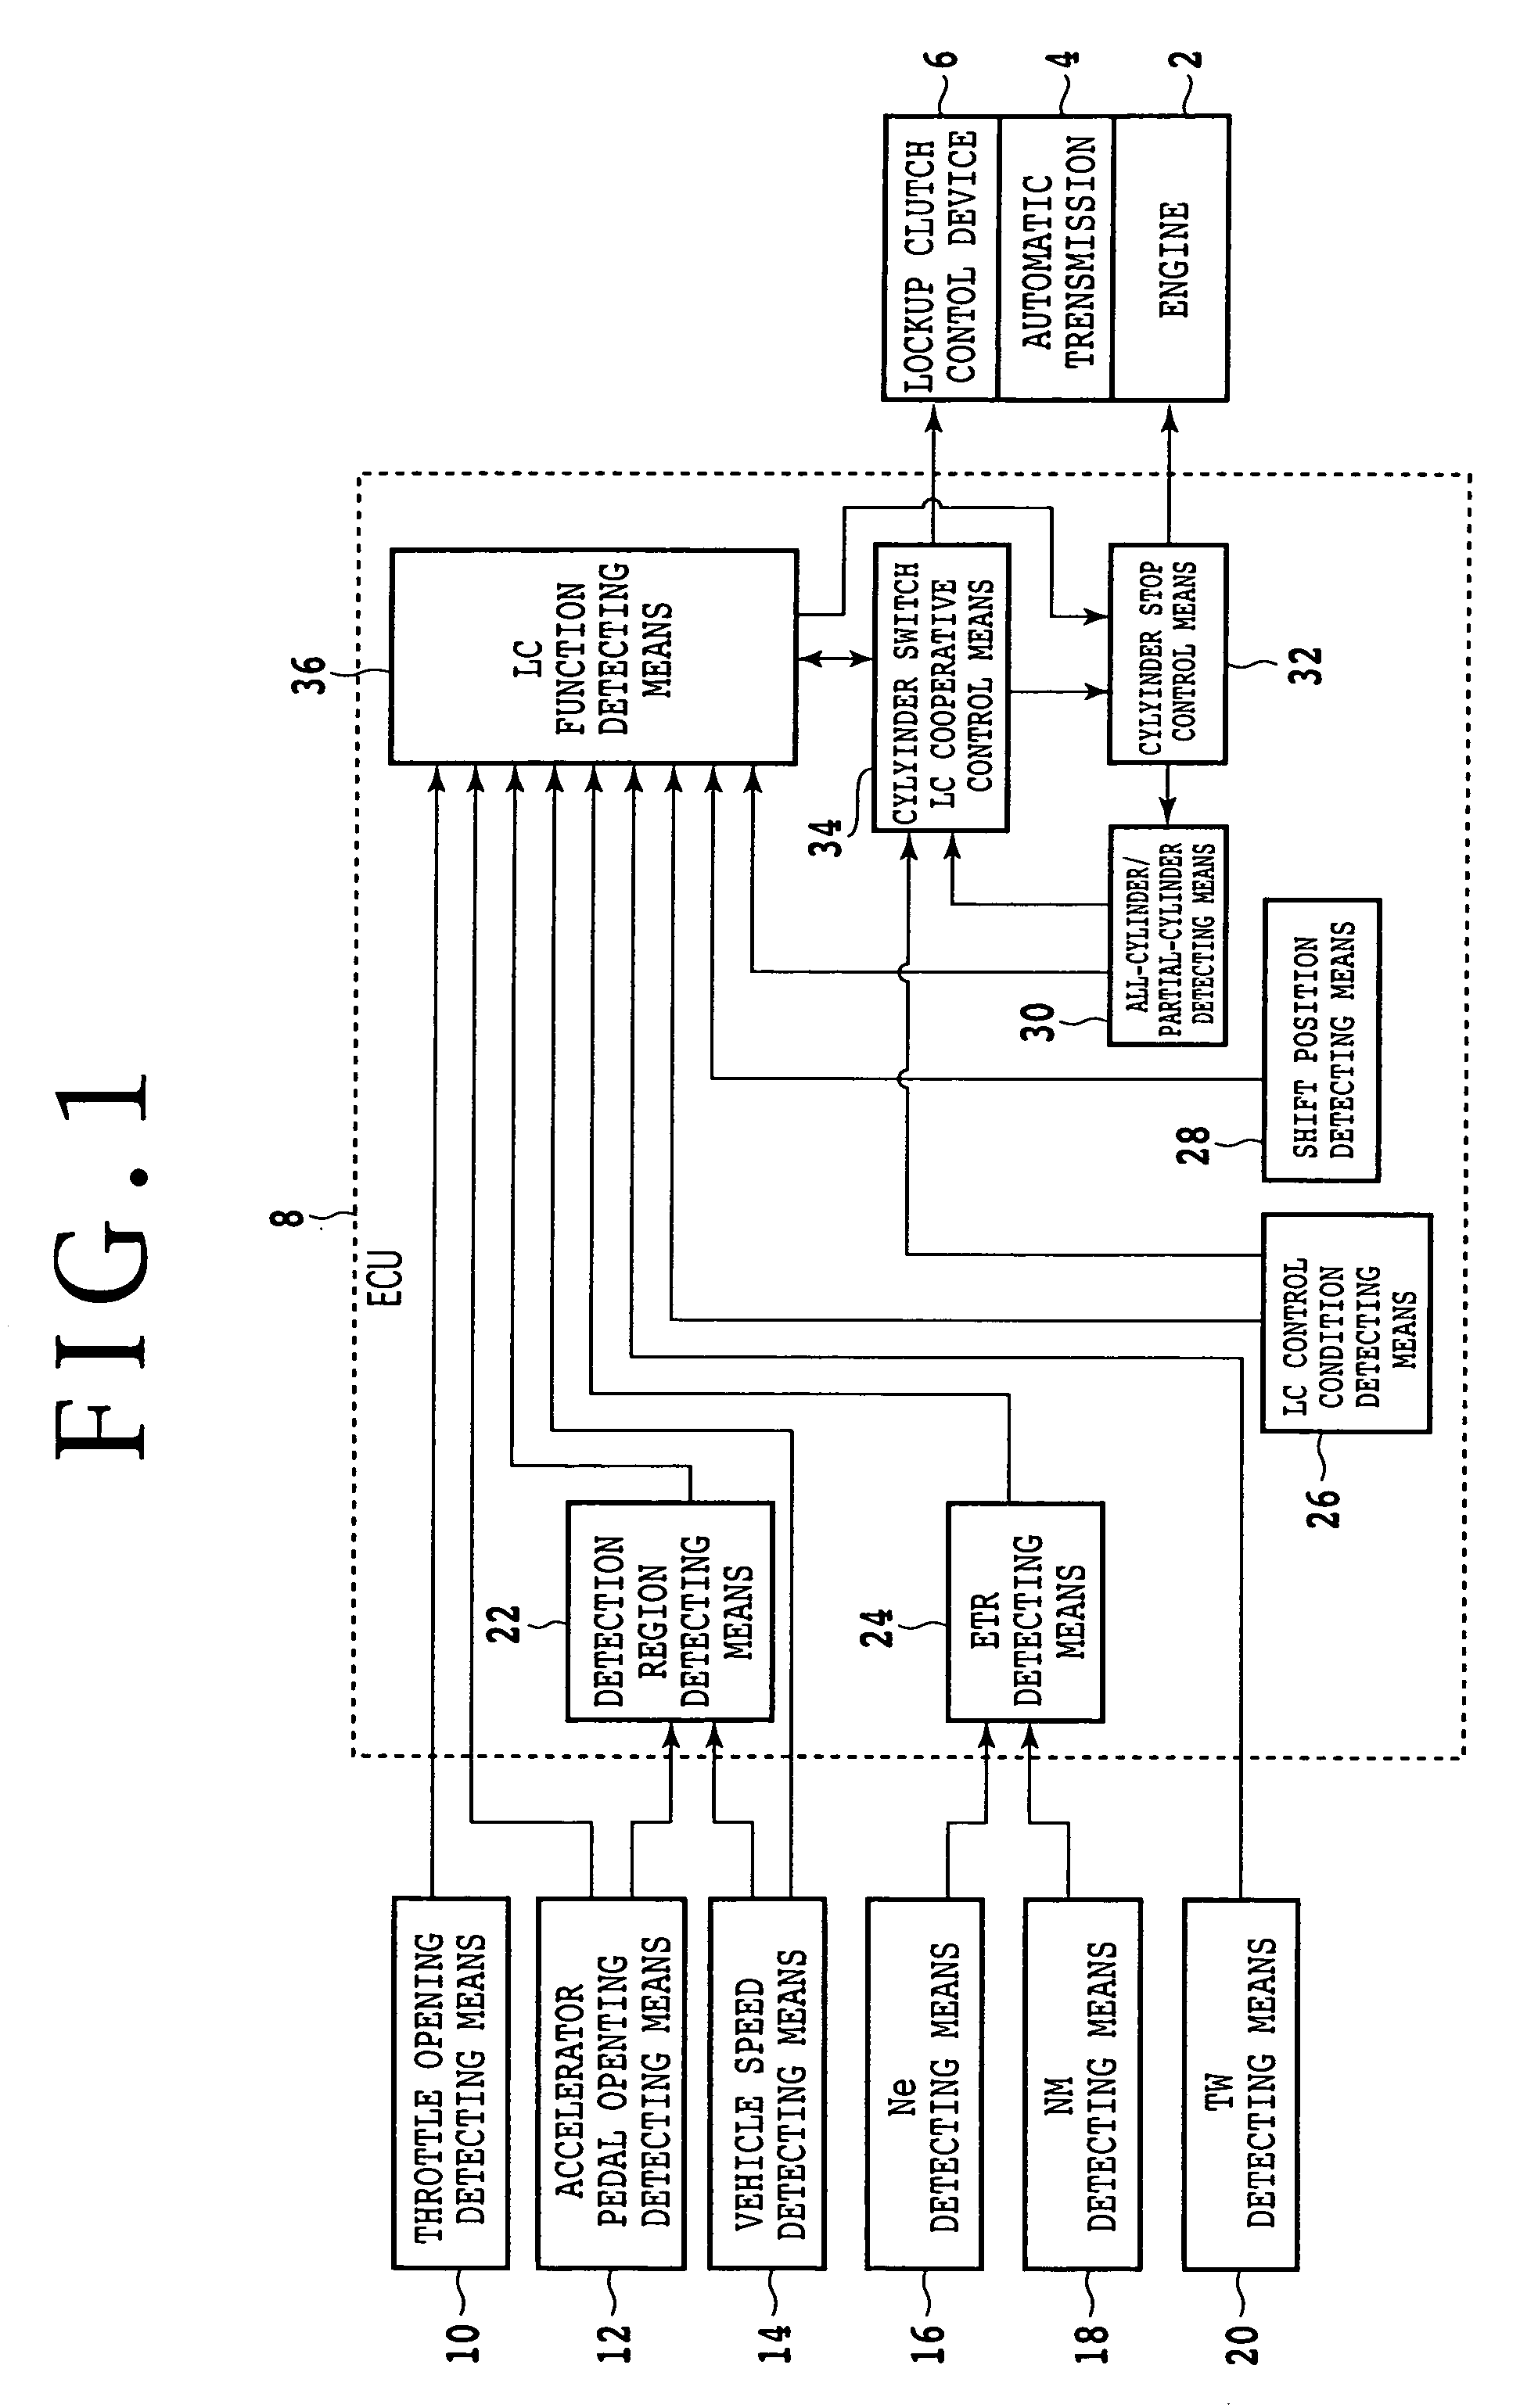 Control system for vehicle having an engine capable of performing and stopping combustion in each cylinder